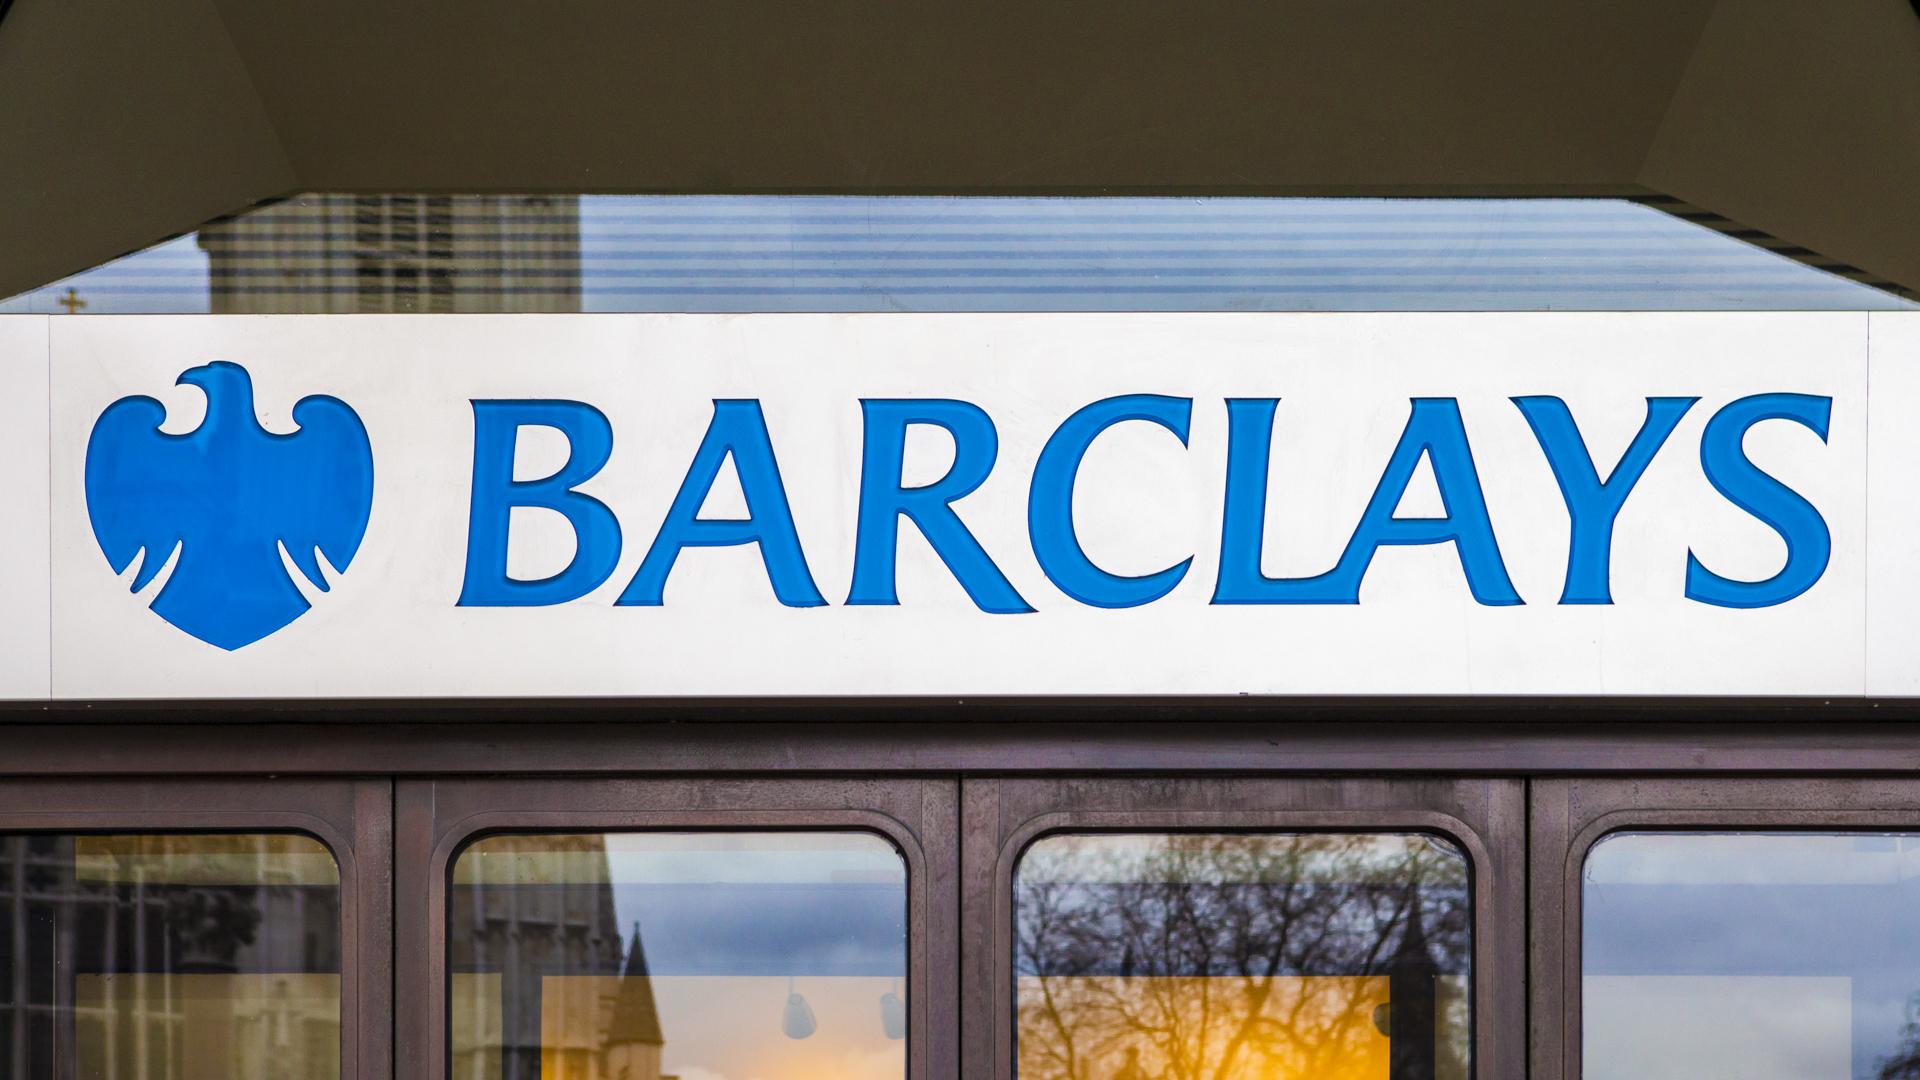 Barclays Hours: Full Hours and Holidays